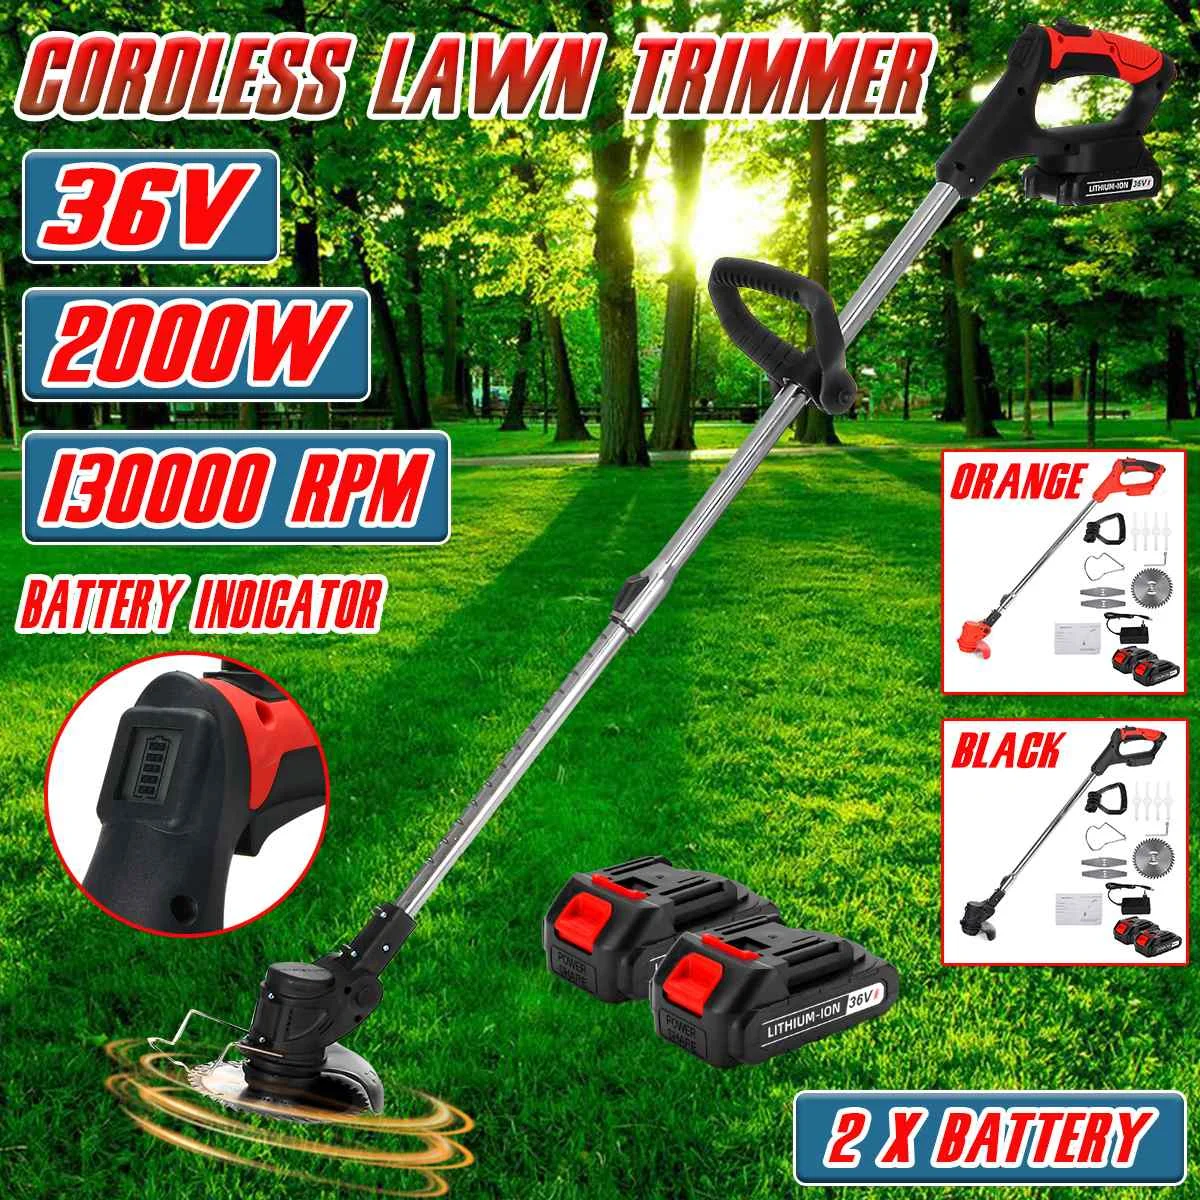 36V Electric Lawn Mower 2000W 130000RPM Cordless Grass Trimmer Adjustable 3 IN 1 Cutter Digital Display For Makita 18V Battery